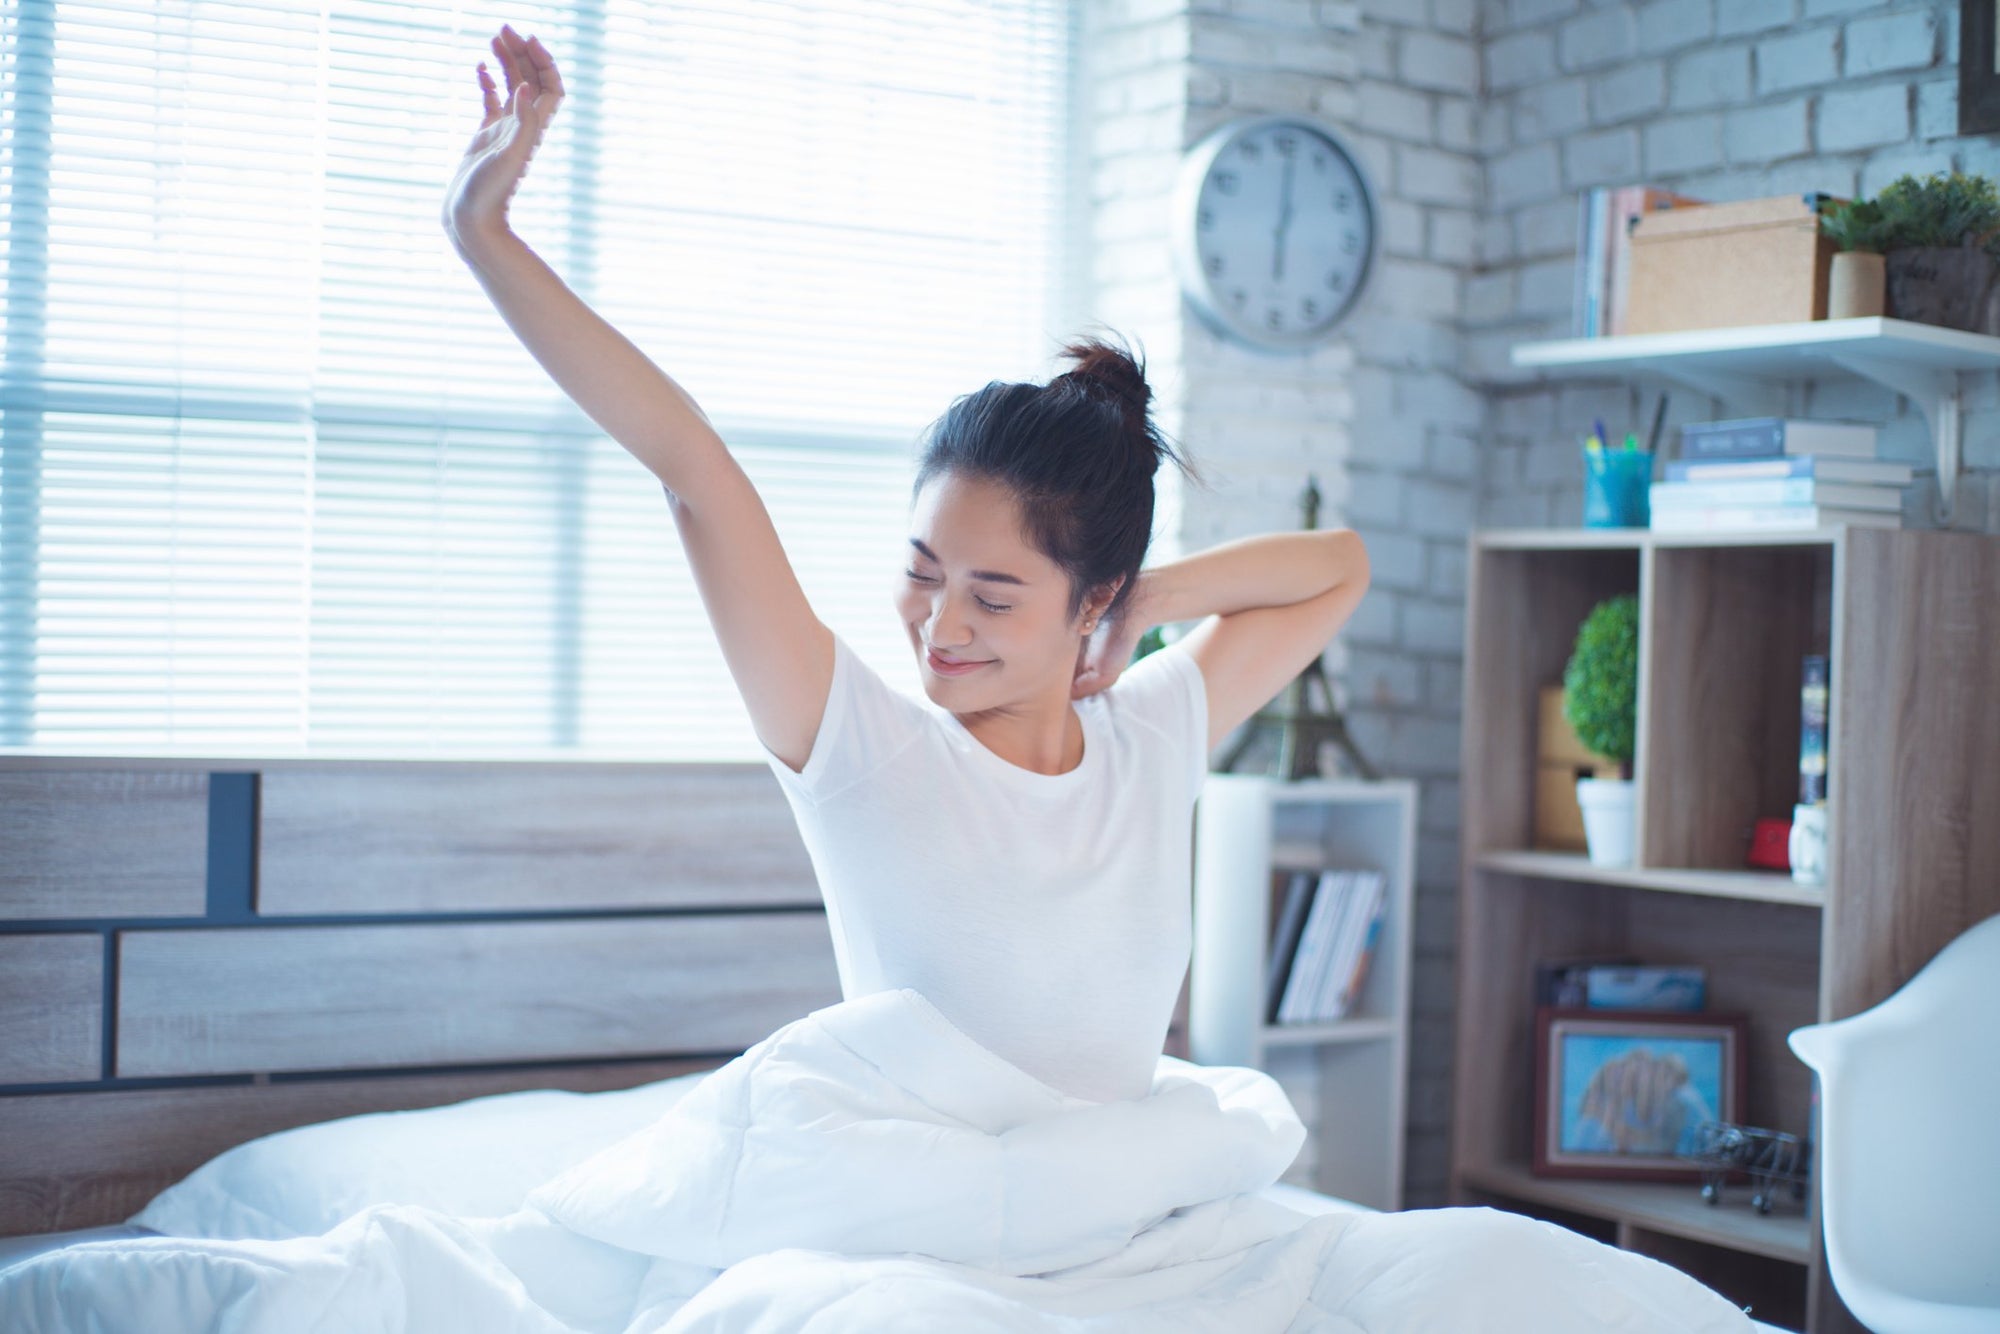 Waking up - what affects your sleep?